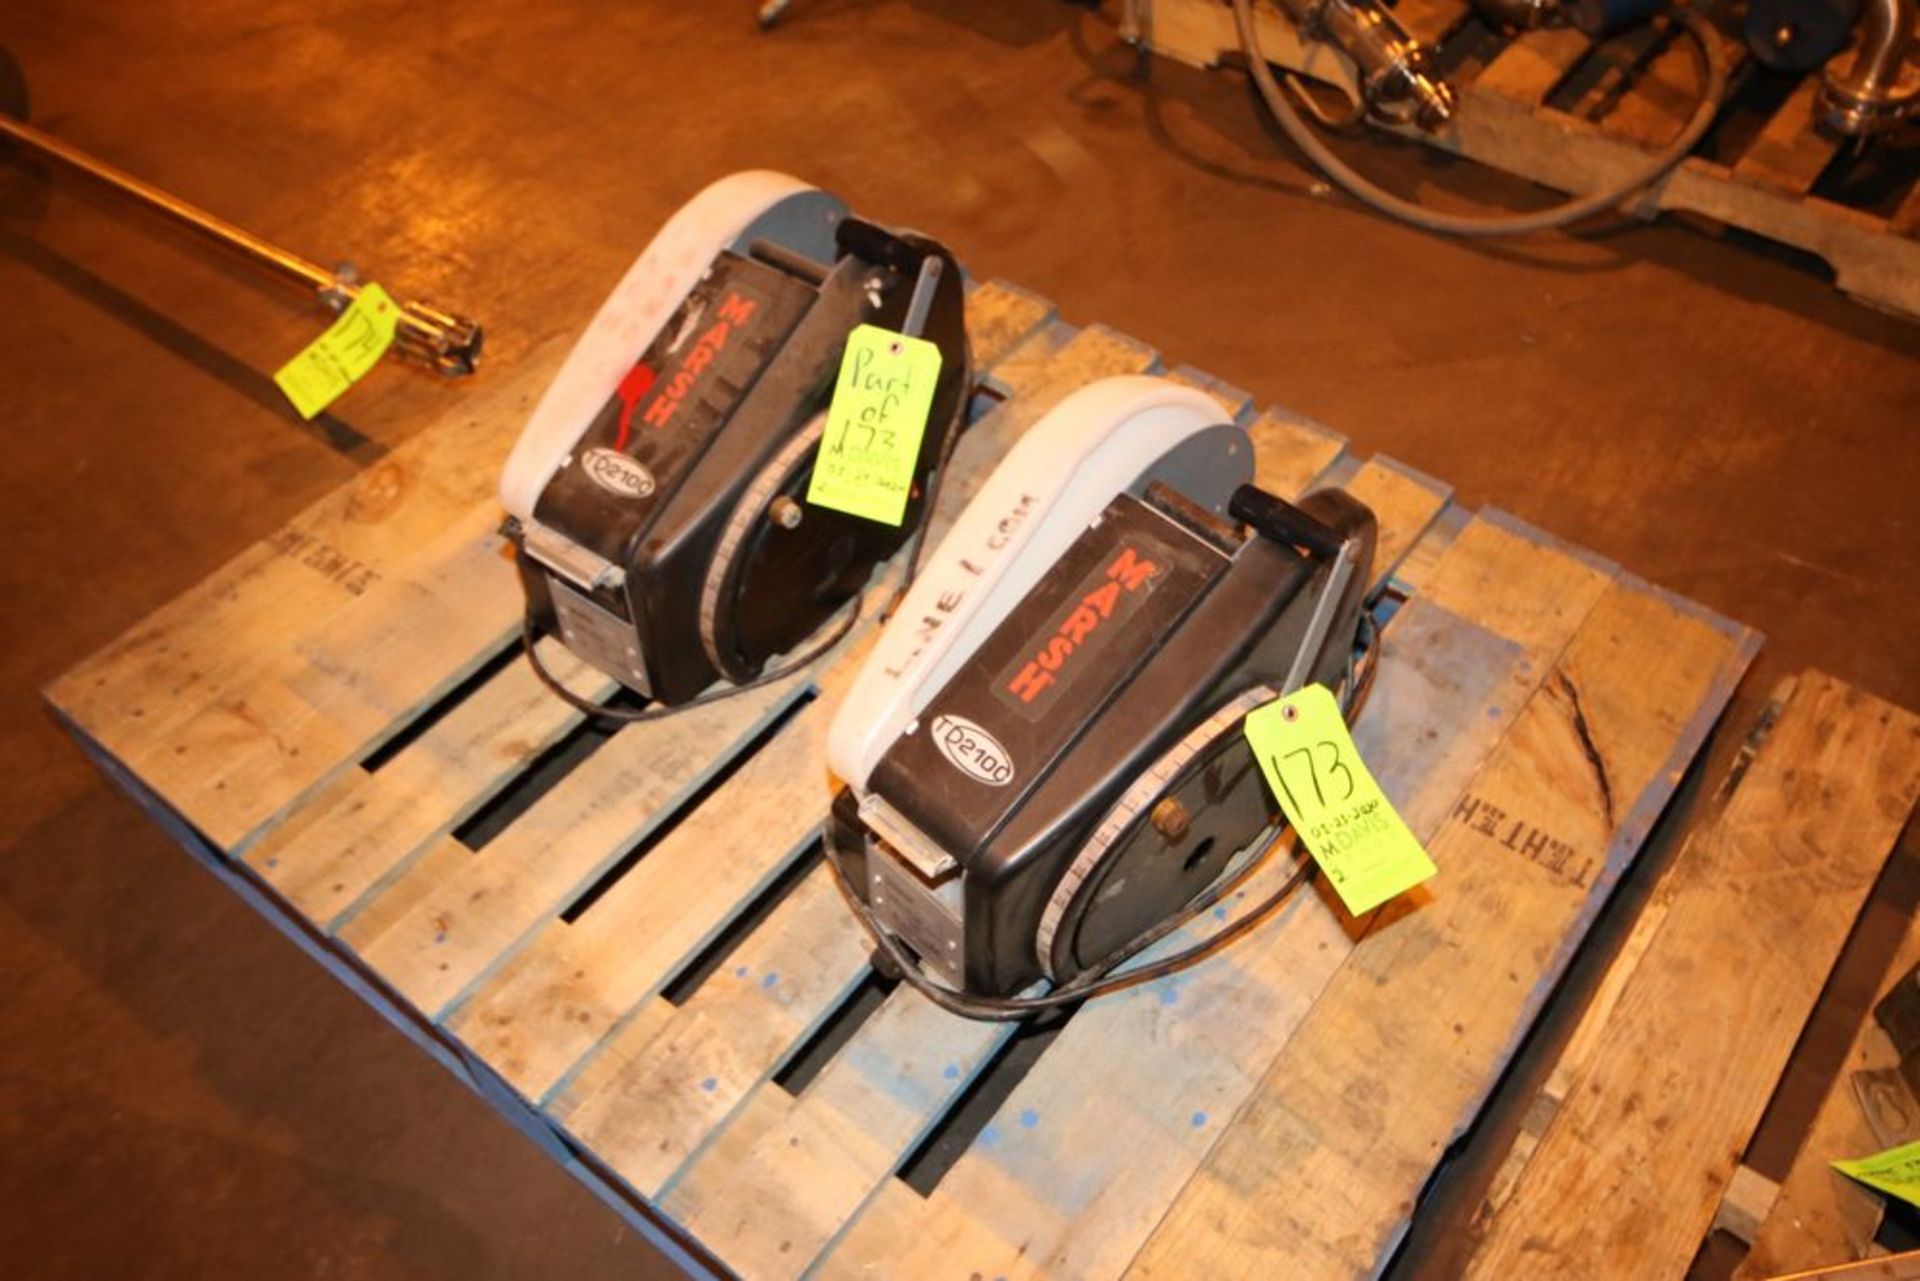 Marsh Tape Dispensers, M/N TDH110, 115 Volts (LOCATED IN BROCKPORT, NY) (NOTE: SUBJECT TO